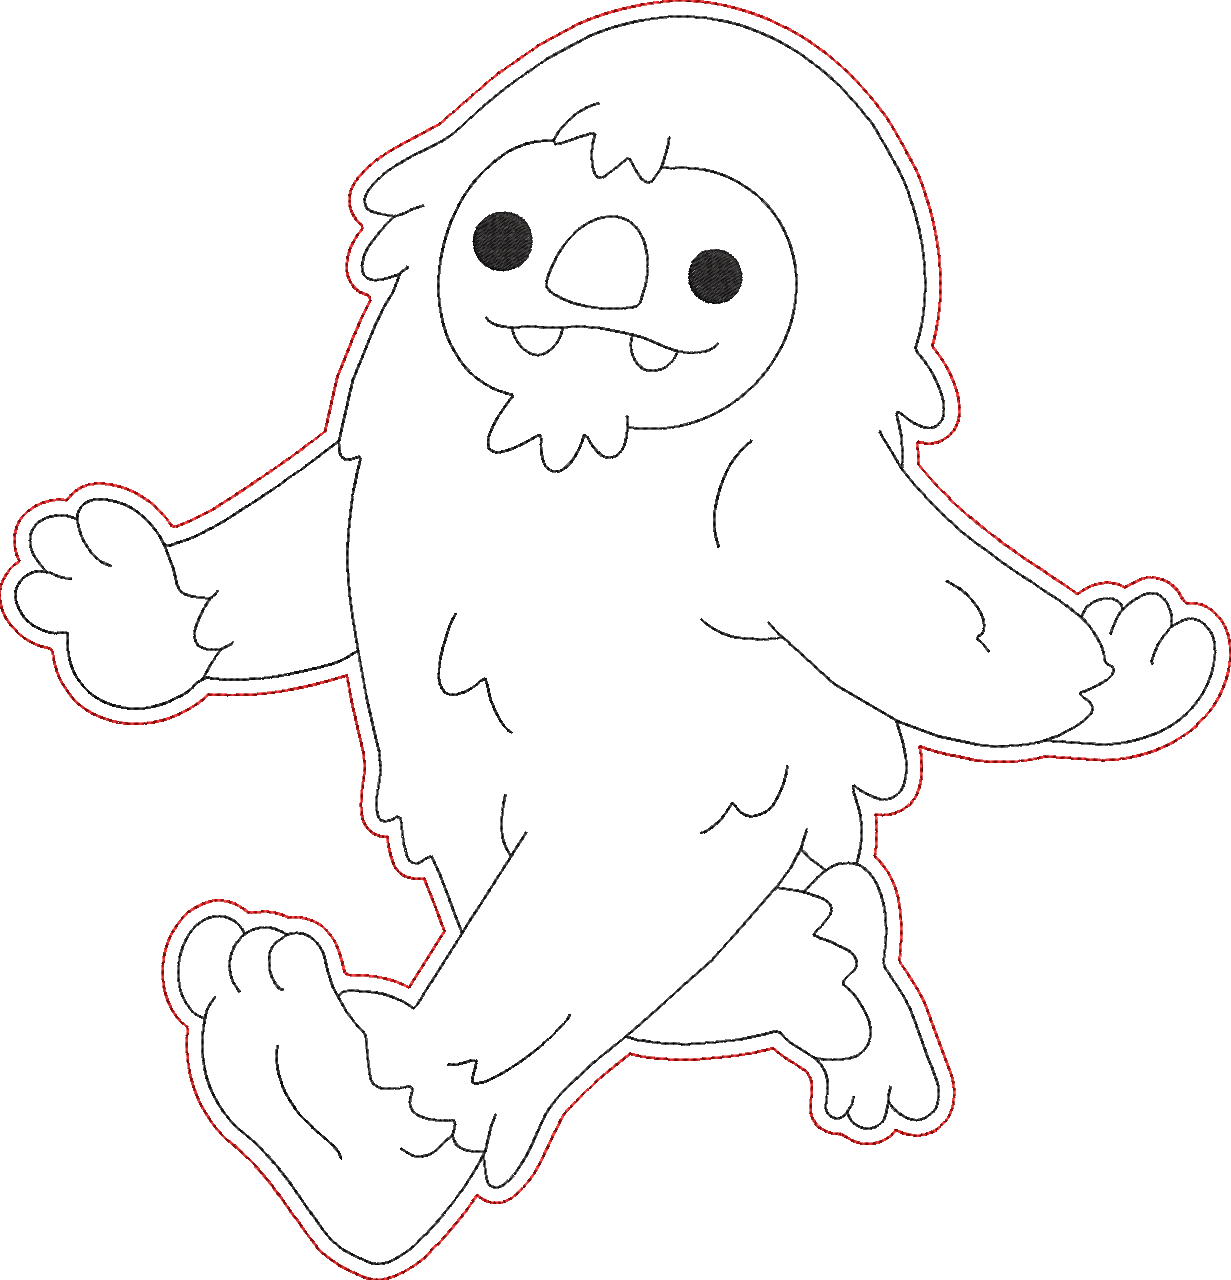 Cute Cryptid Coloring Dolls - Sasquatch Embroidery Design